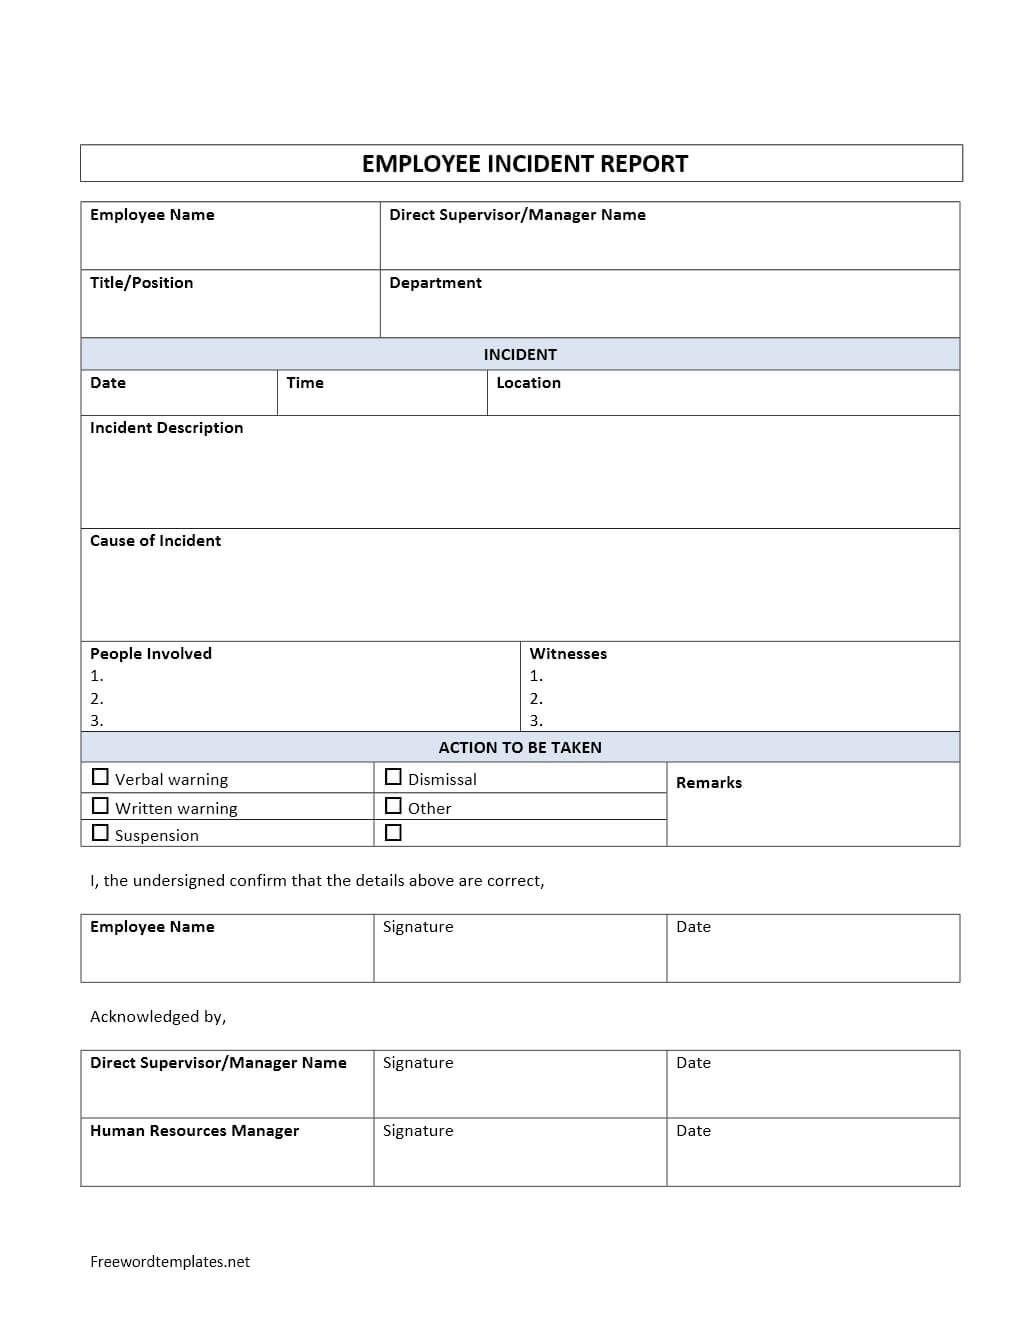 Employee Incident Report With Microsoft Word Templates Reports